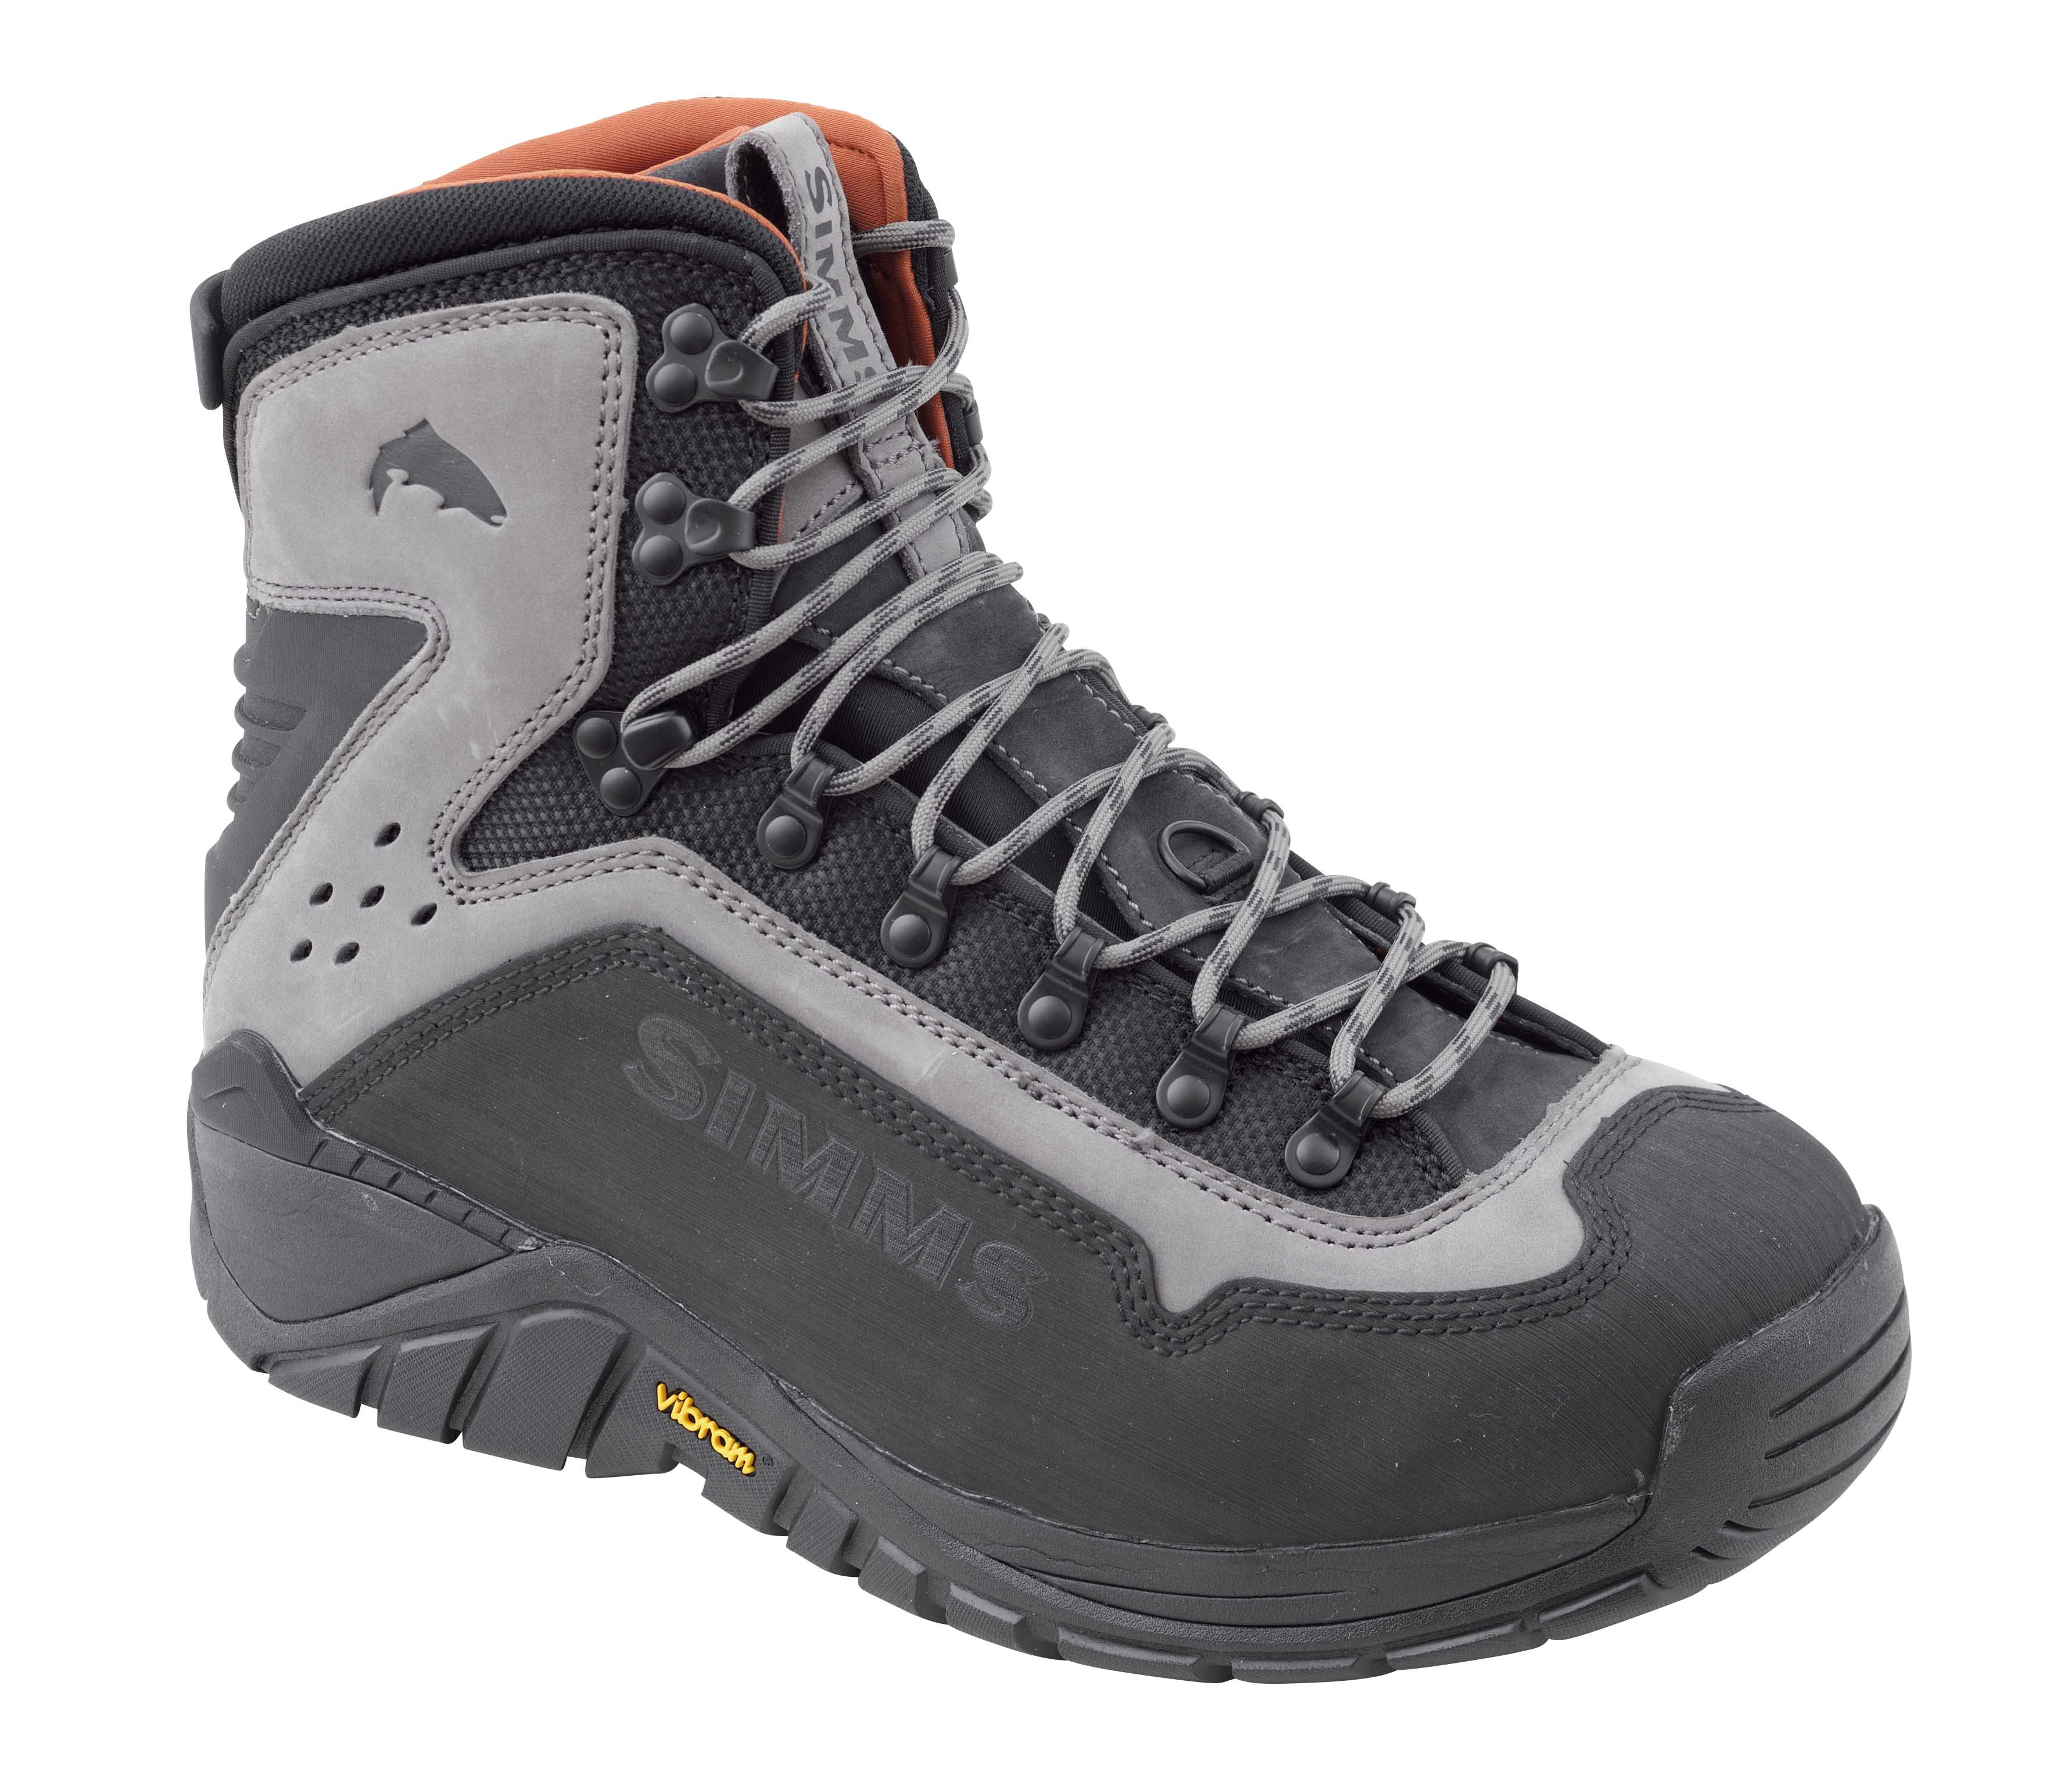 Simms G3 Guide Boot - Vibram - Click Image to Close